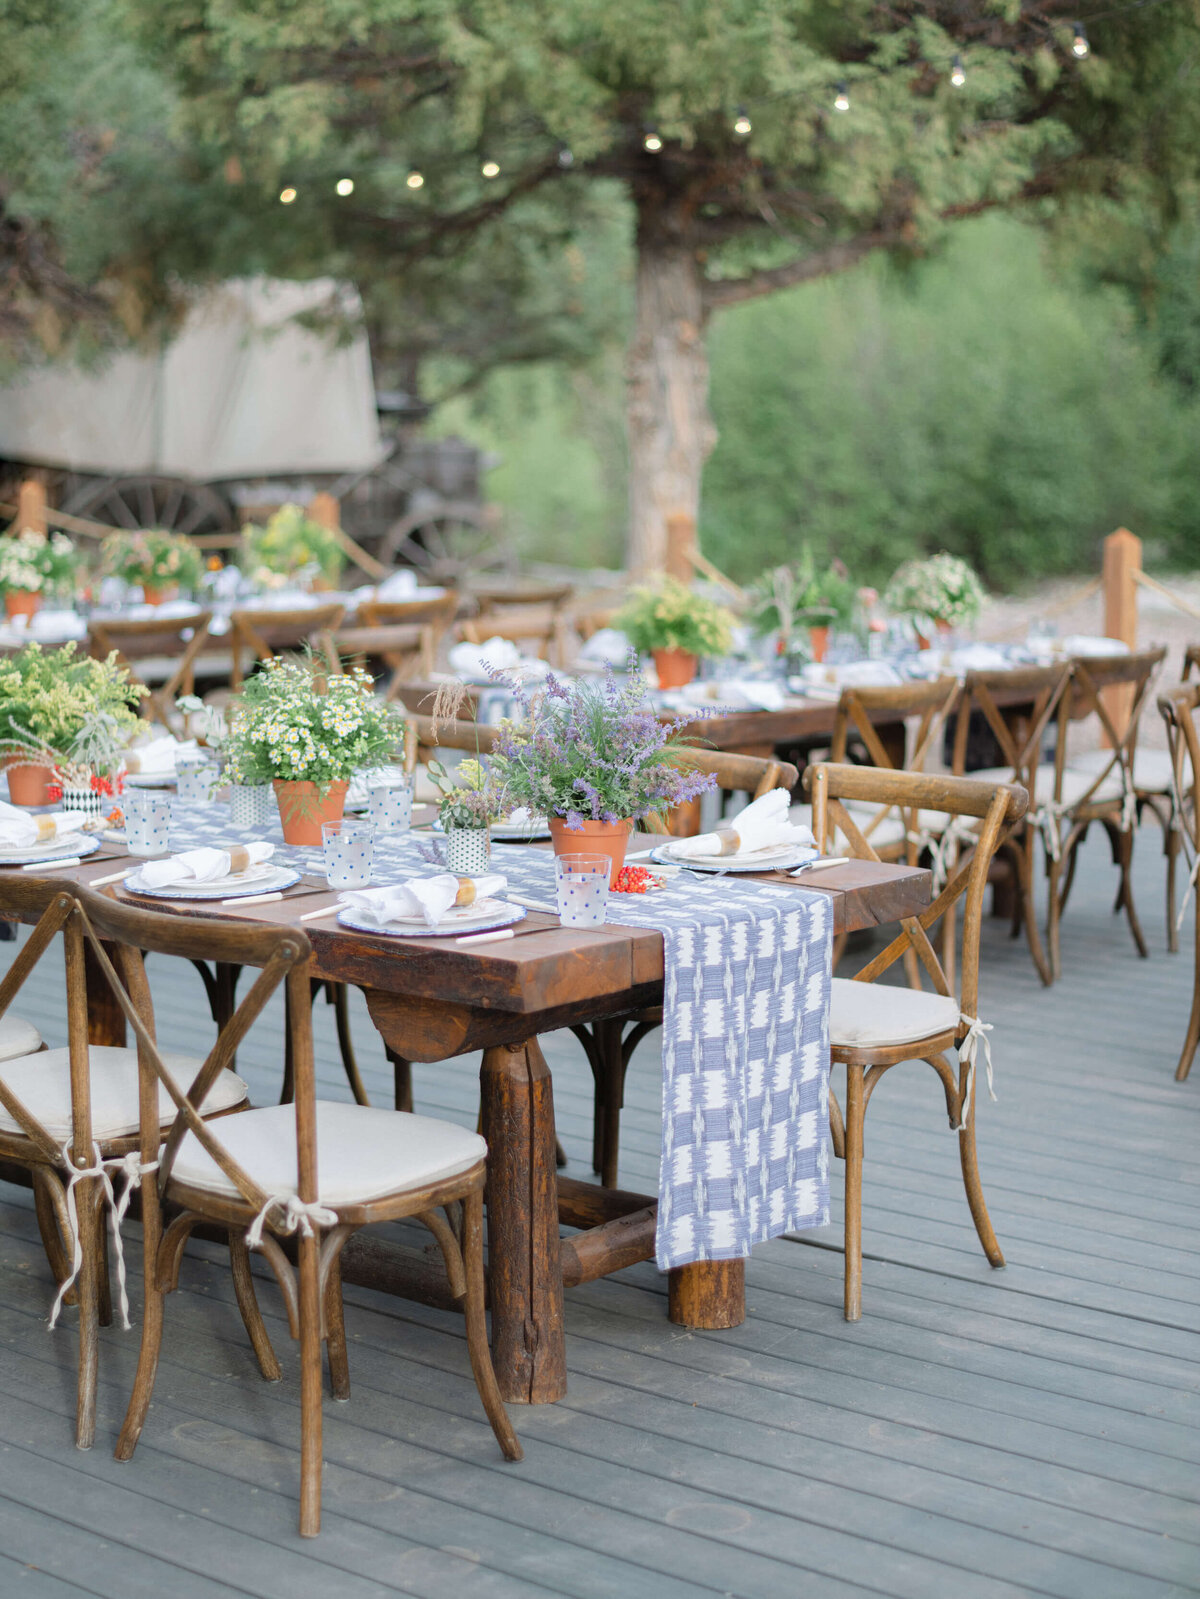 21-KT-Merry-Photography-Western-Wedding-Brush-Creek-Ranch-Tables